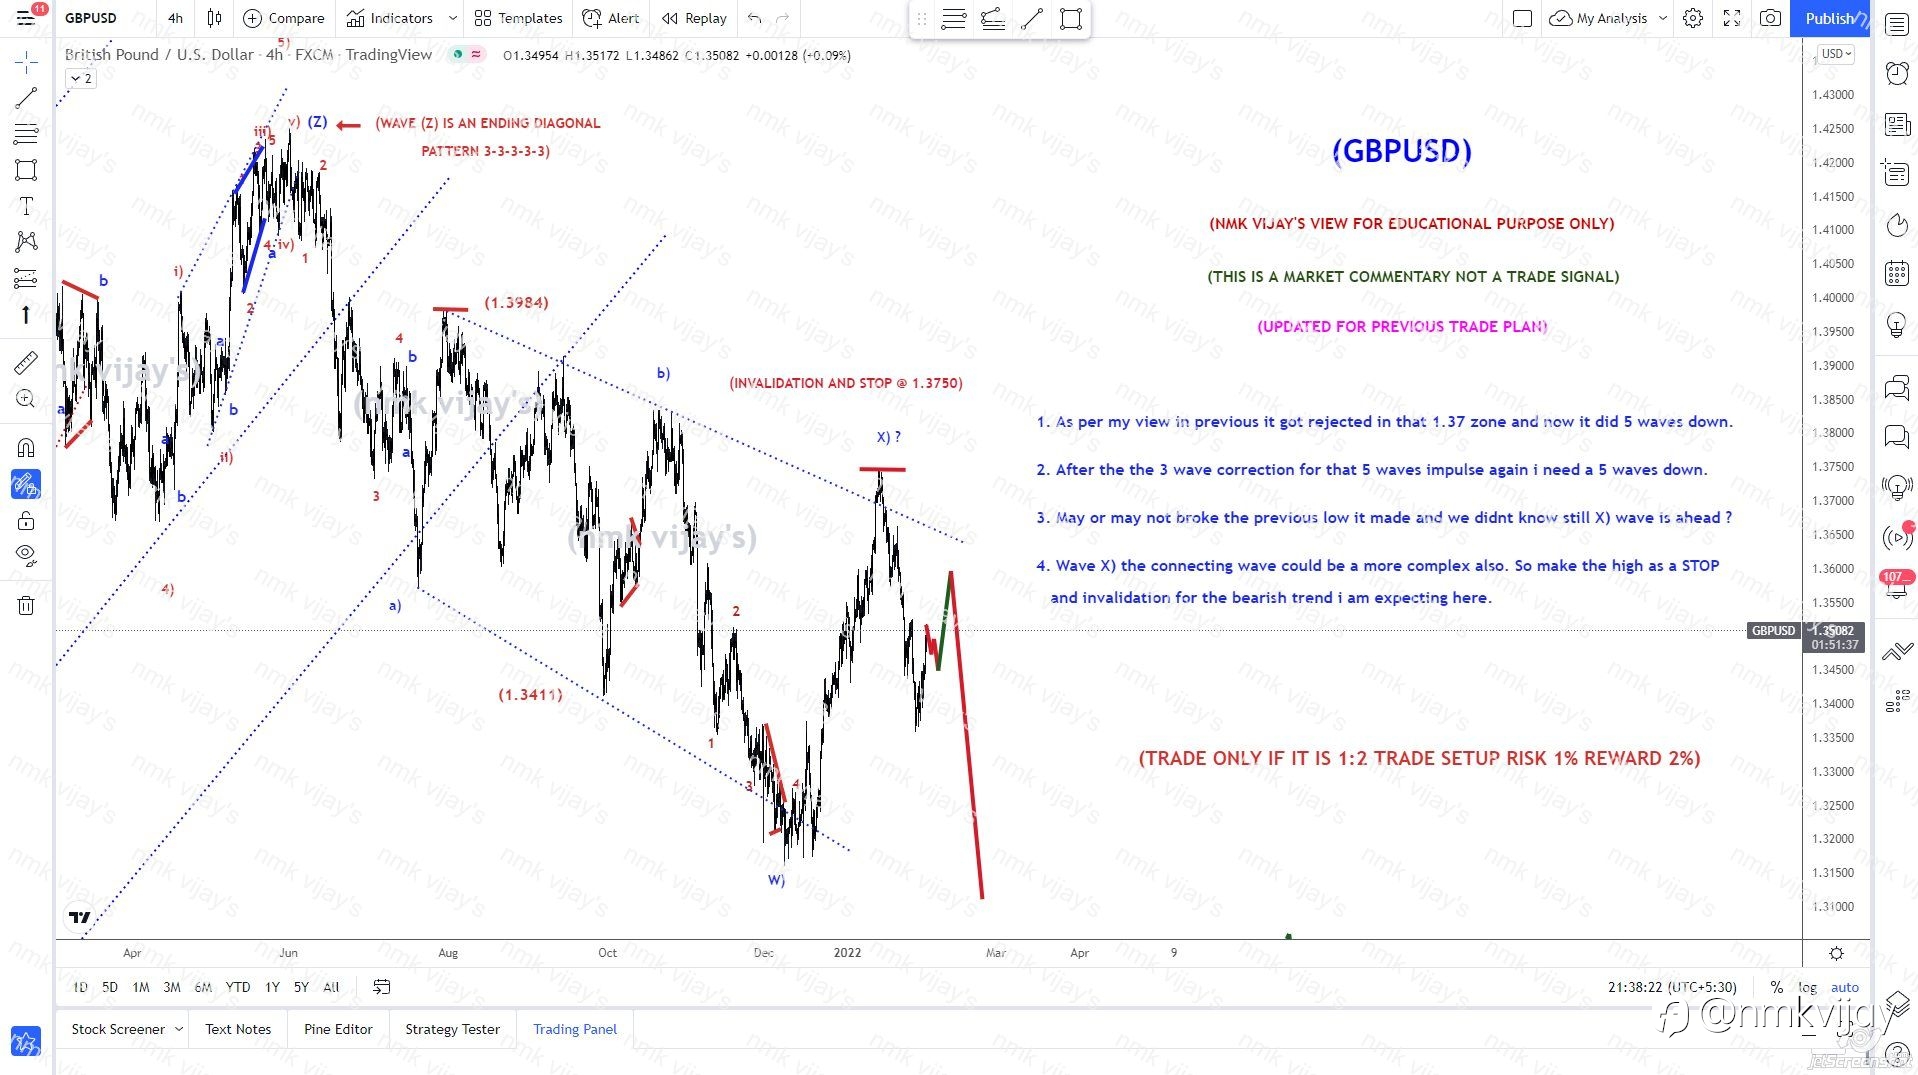 GBPUSD-Expecting a 3 wave for the previous impulse